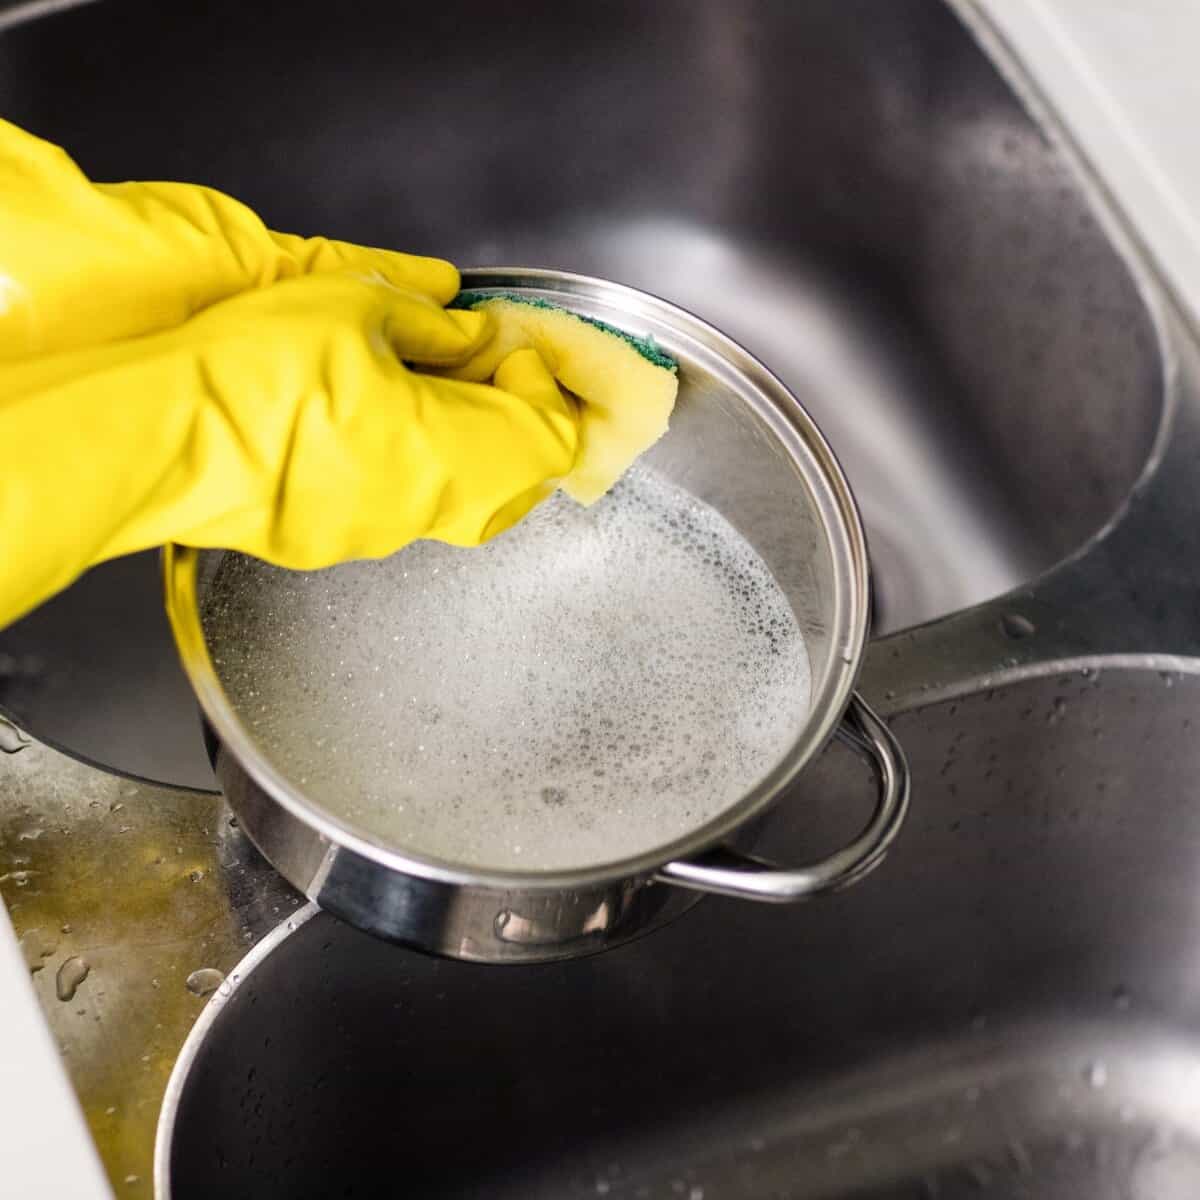 How to clean cooking utensils and pans